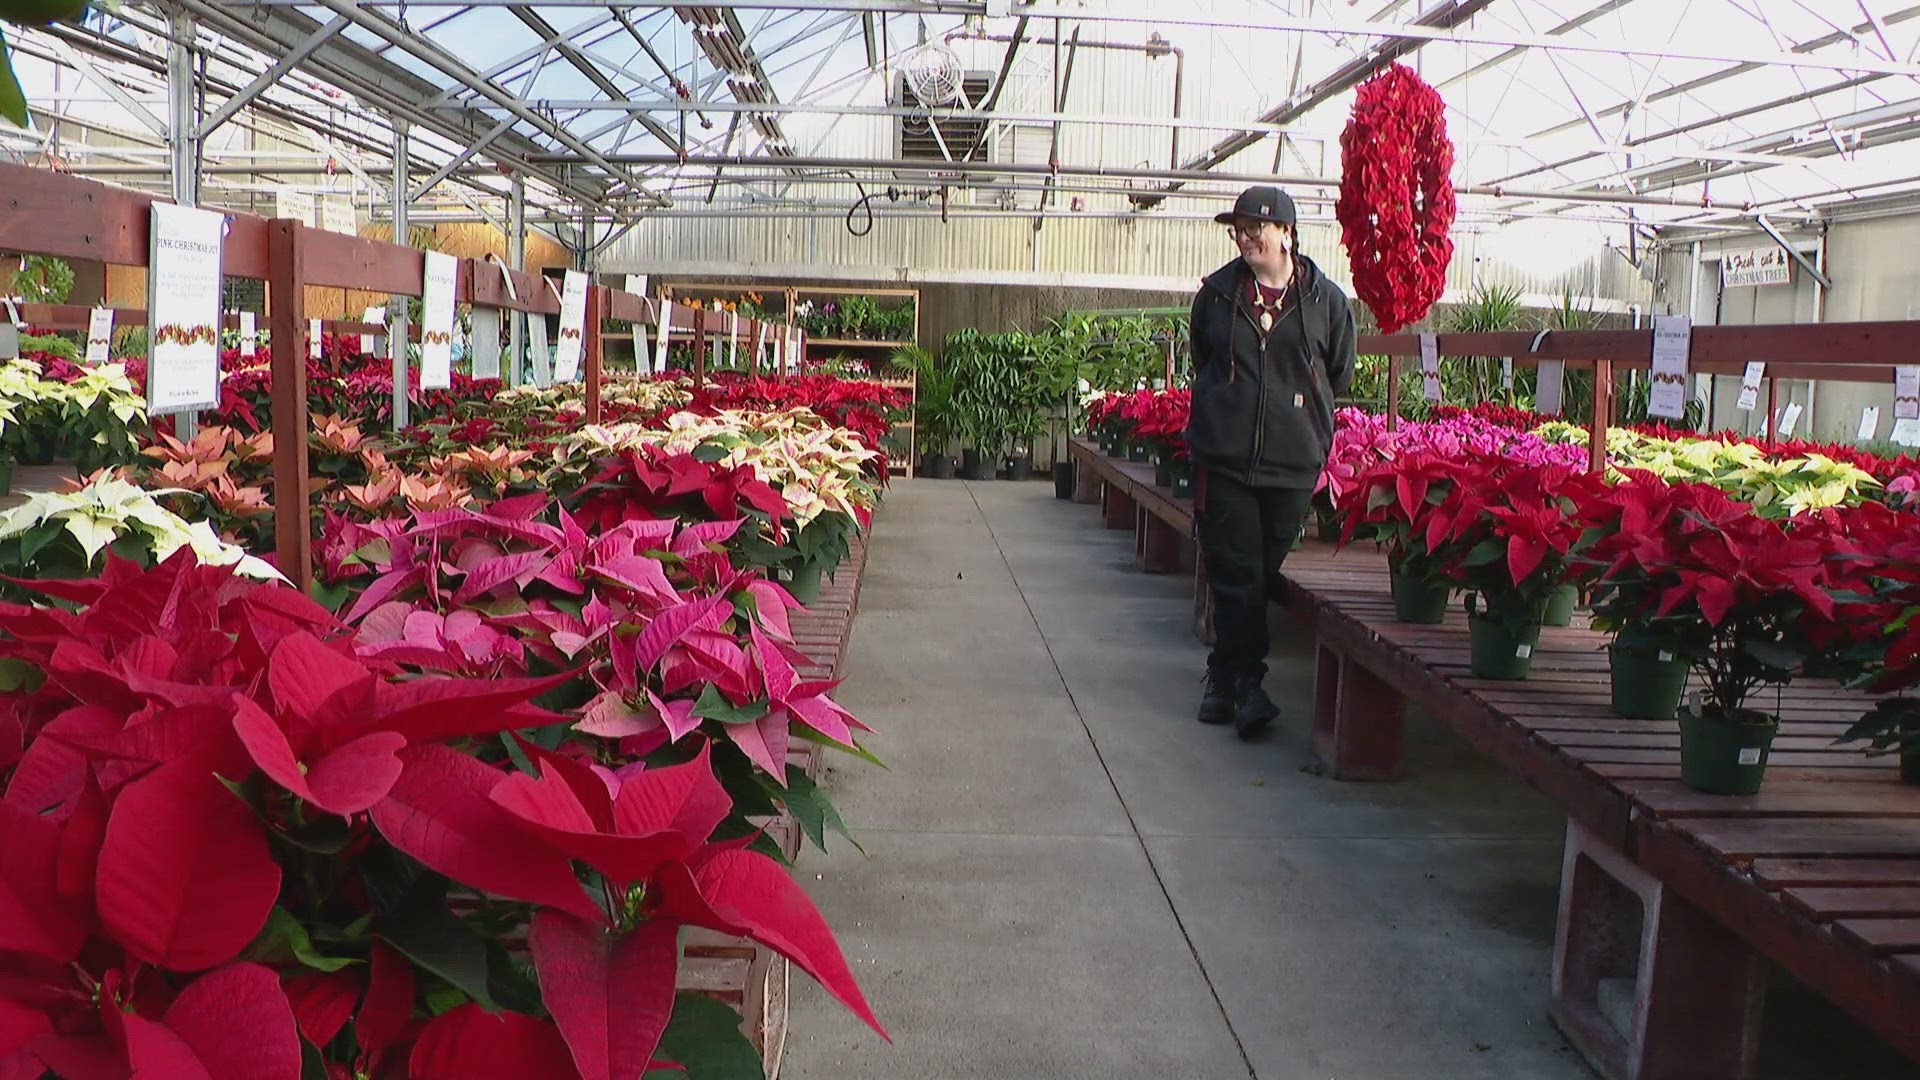 Danielle Ramos with Echter's Nursery helps grow holiday poinsettias and starts her work in July – she offers tips to take you poinsettias past the holidays.